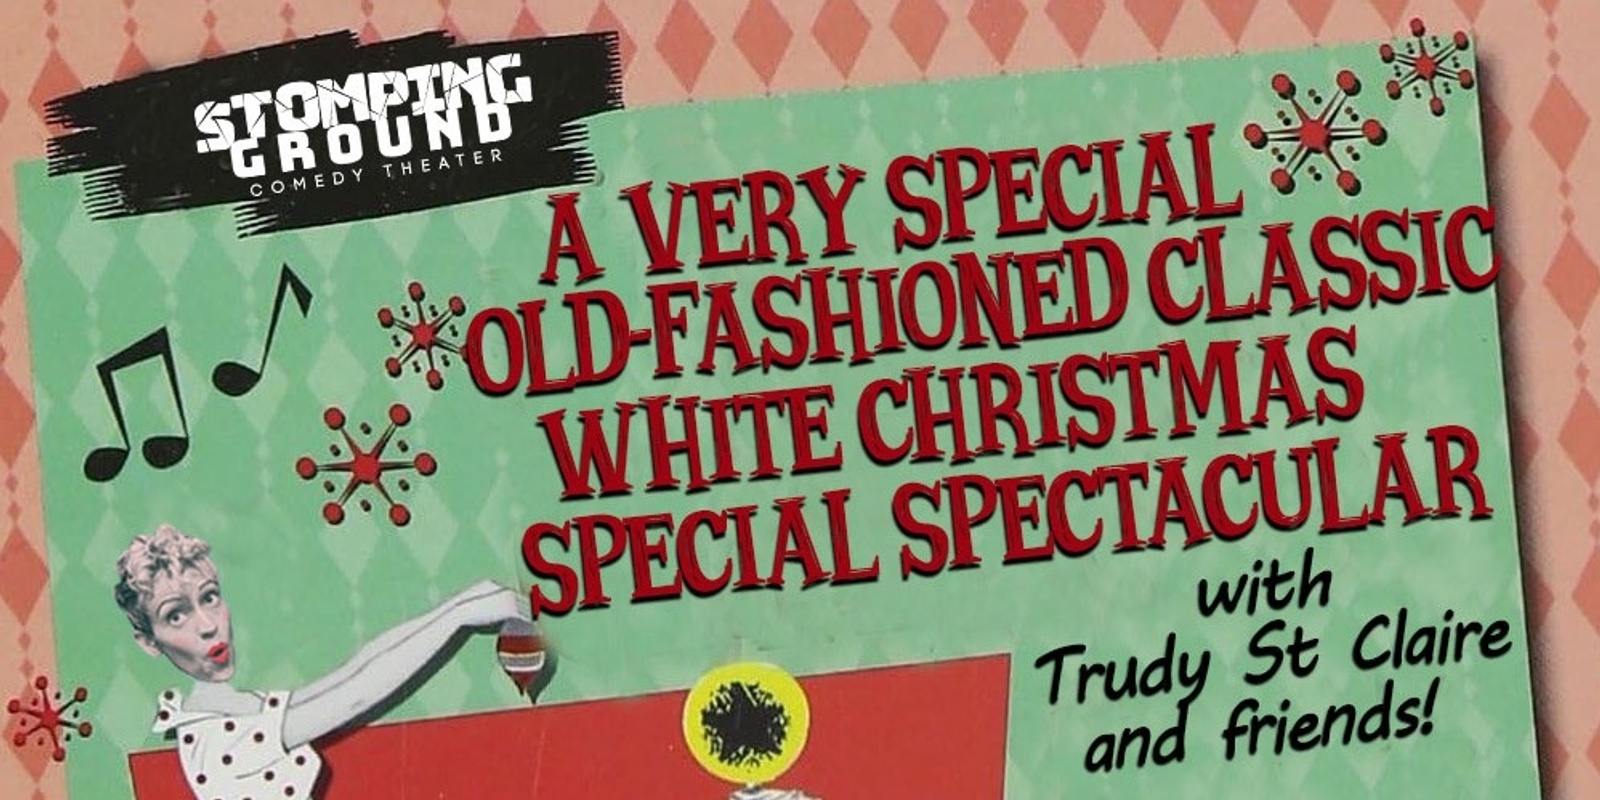 Banner image for A Very Special Old-Fashioned Classic White Christmas Special Spectacular with Trudy St. Claire!